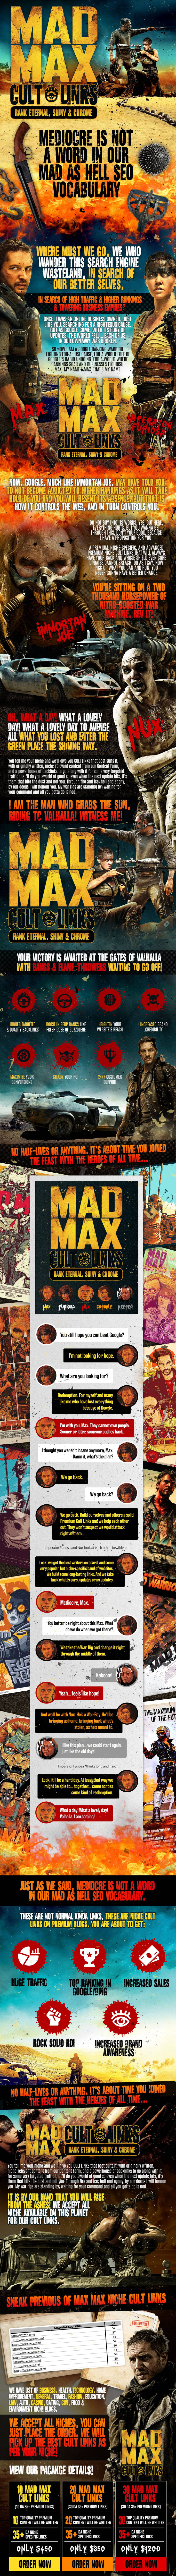 Mad Max Cult Links